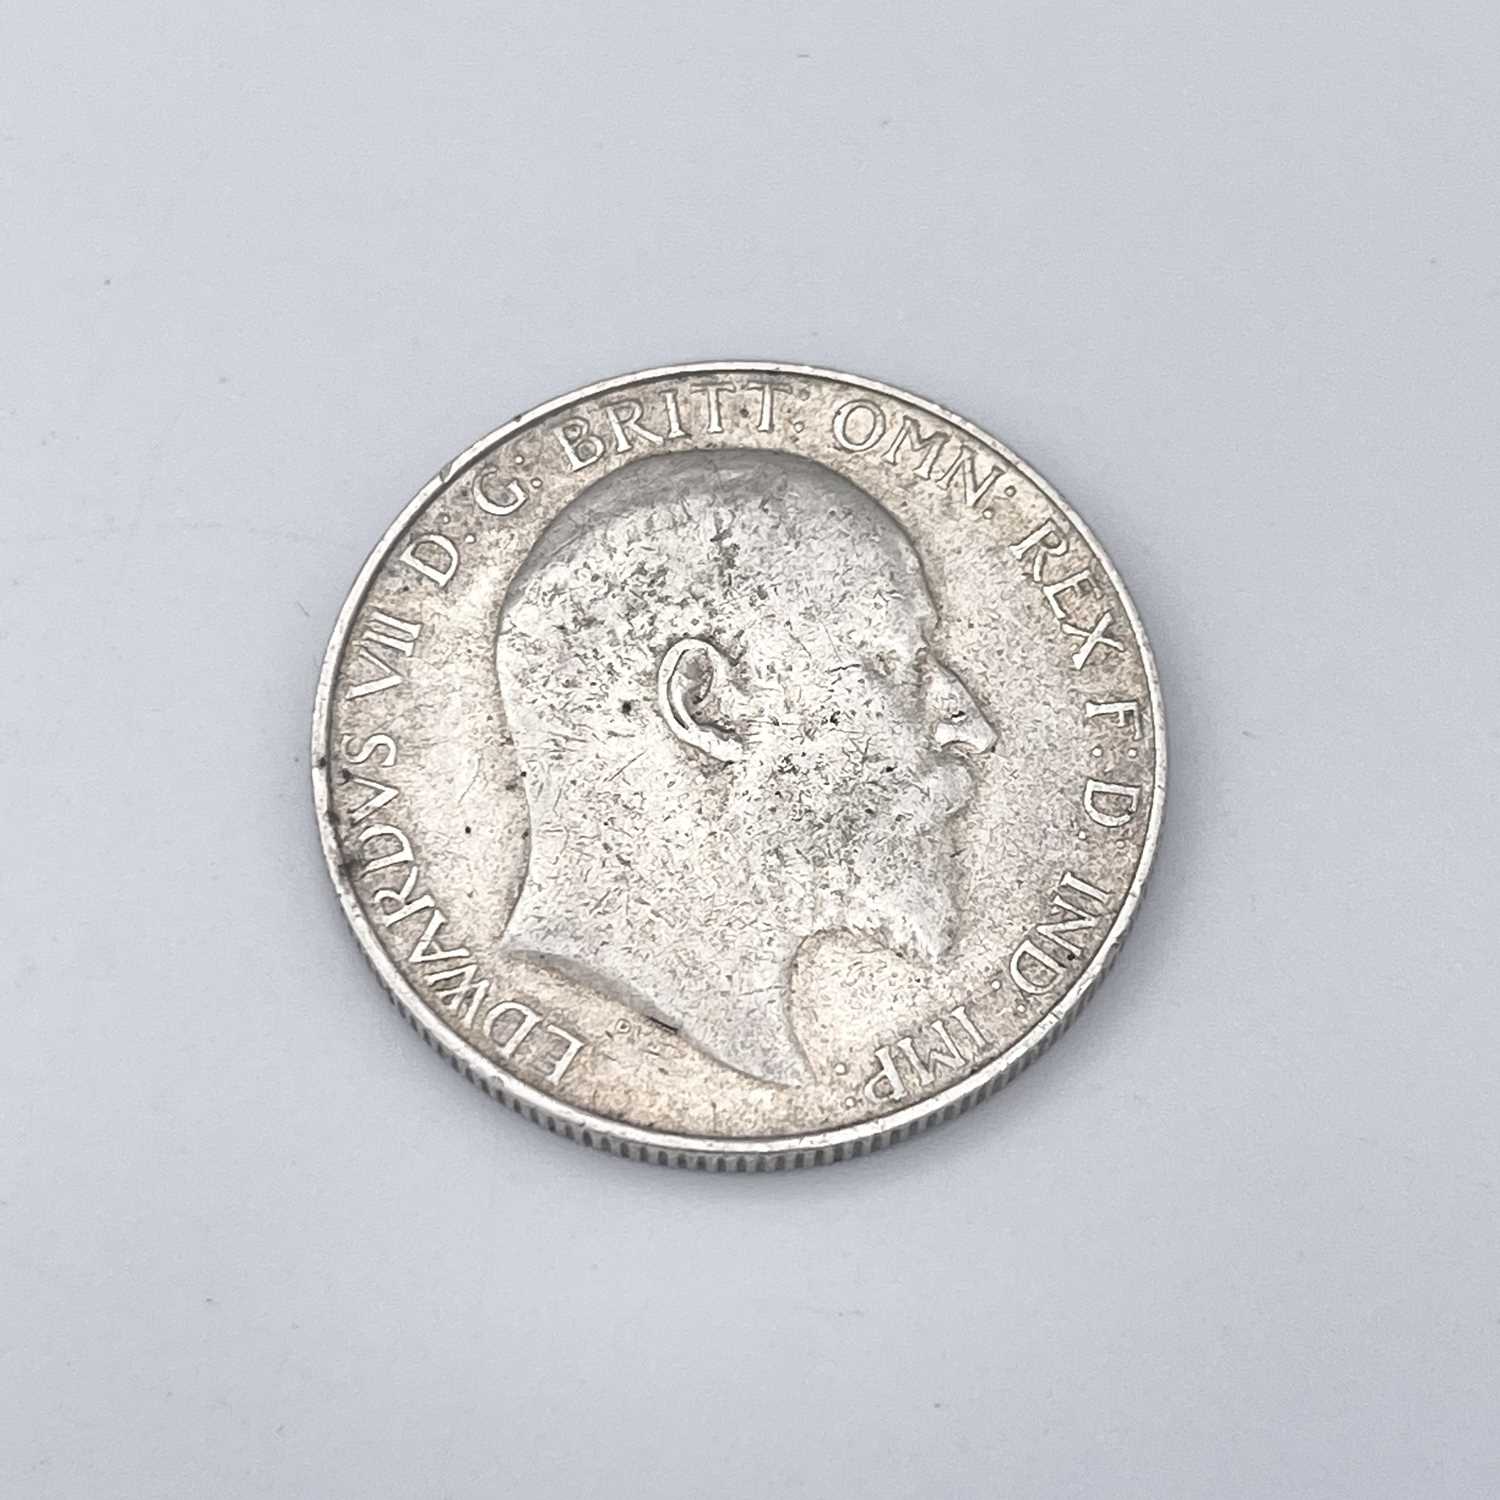 Great Britain King Edward VII 2/- coin RARE 1905 EXAMPLE (x1) Hard to find coin with clear date in - Image 2 of 2